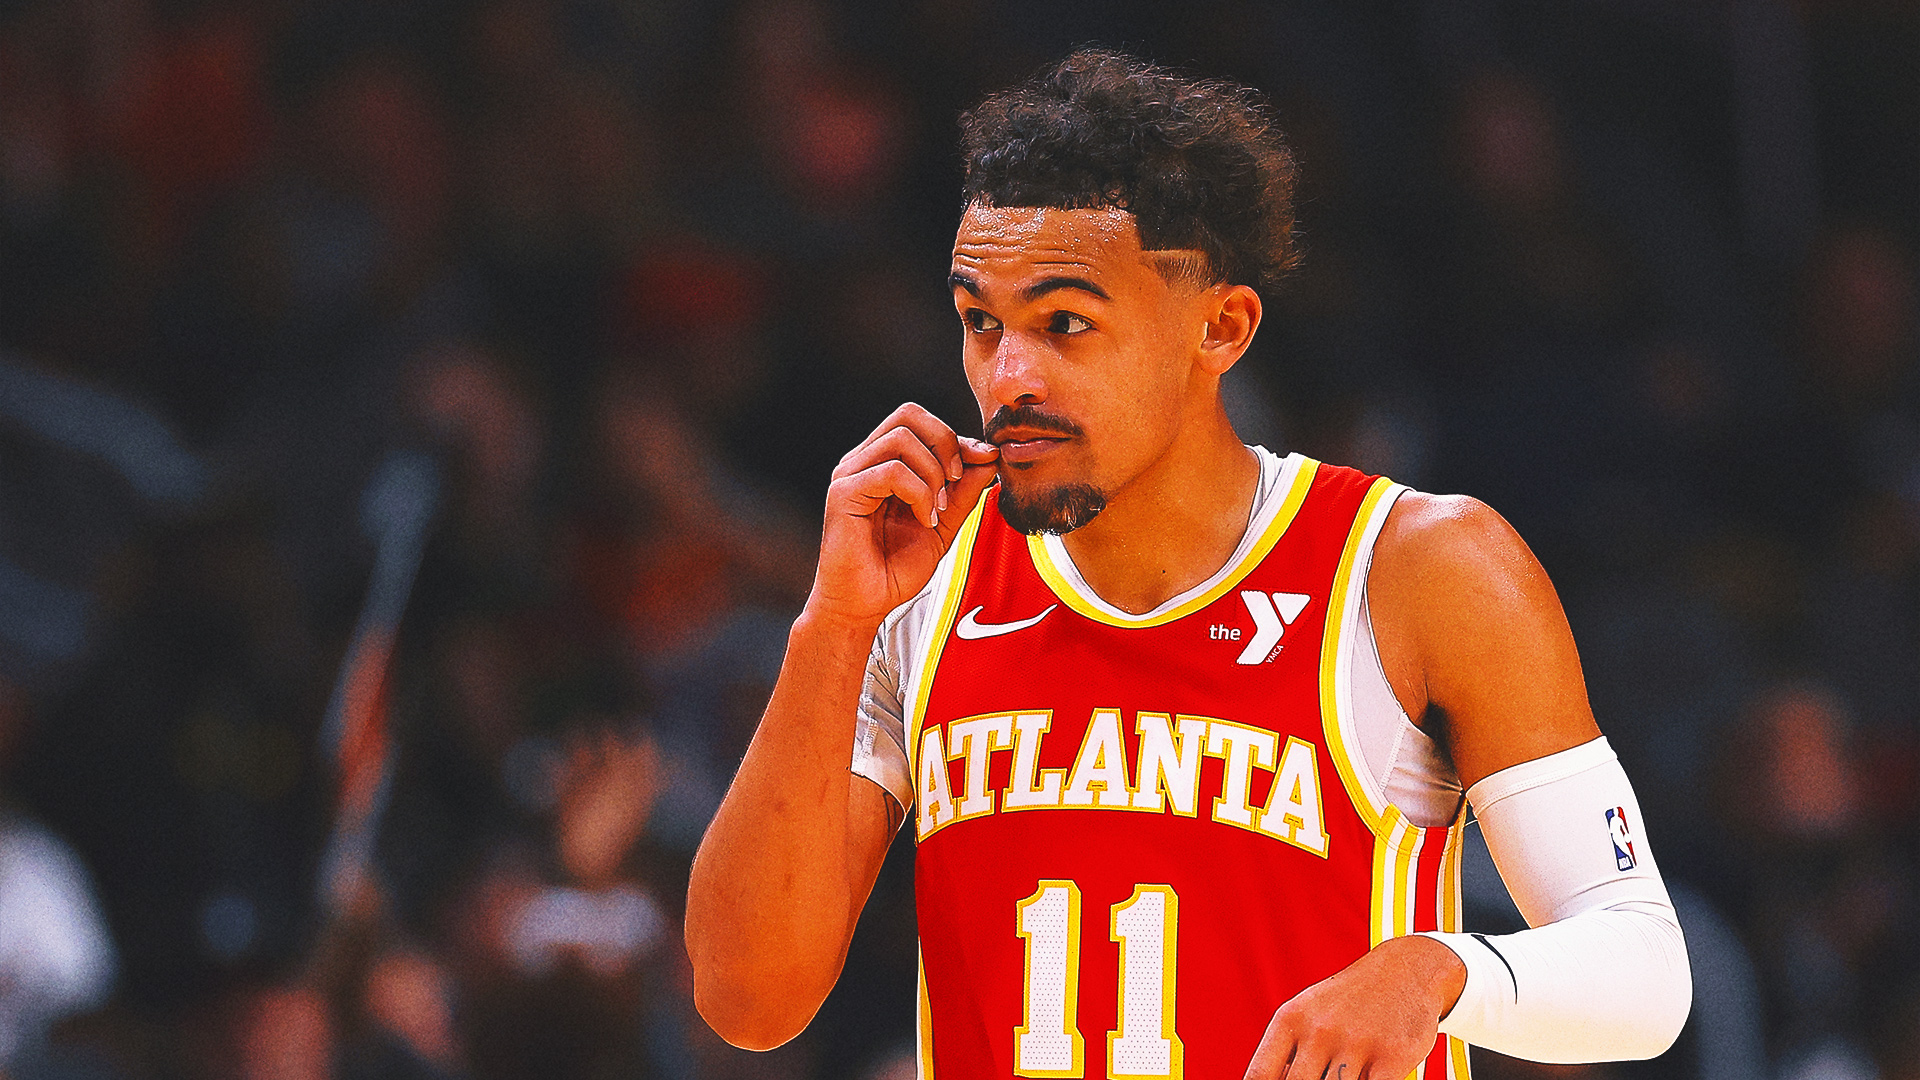 Trae Young stays hot with 31 points, 15 assists as Hawks hand Pistons 24th straight loss, 130-124